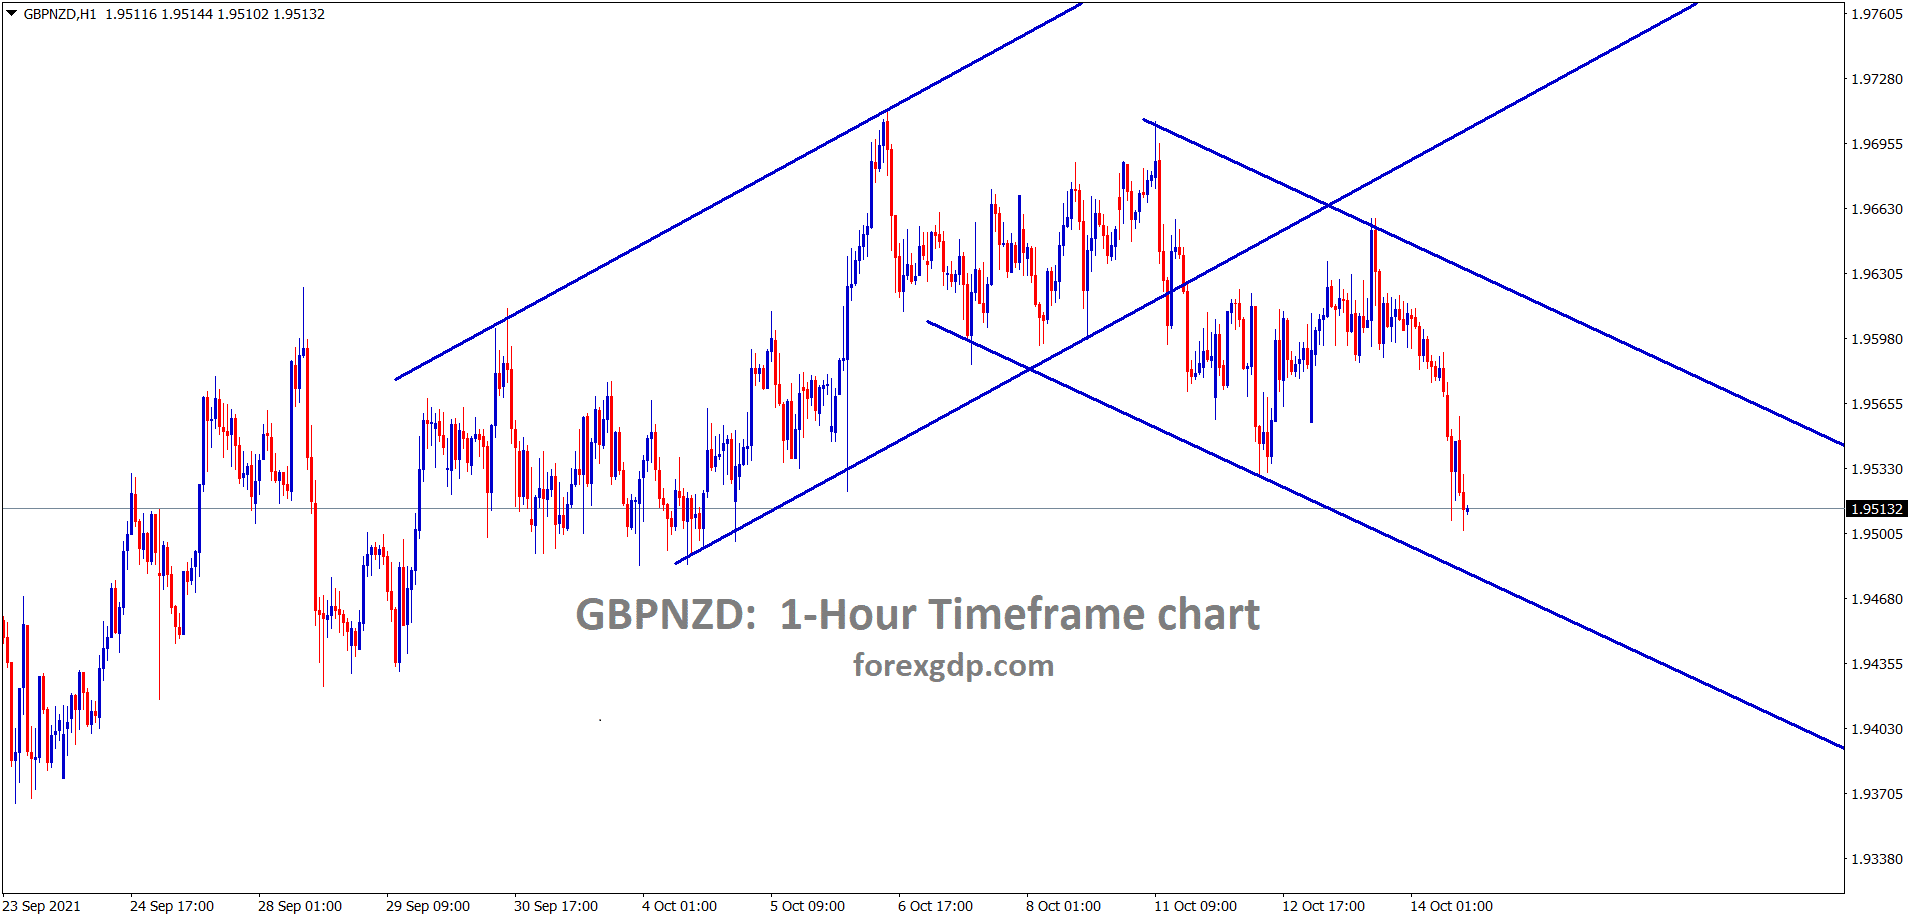 GBPNZD is moving between the channel ranges